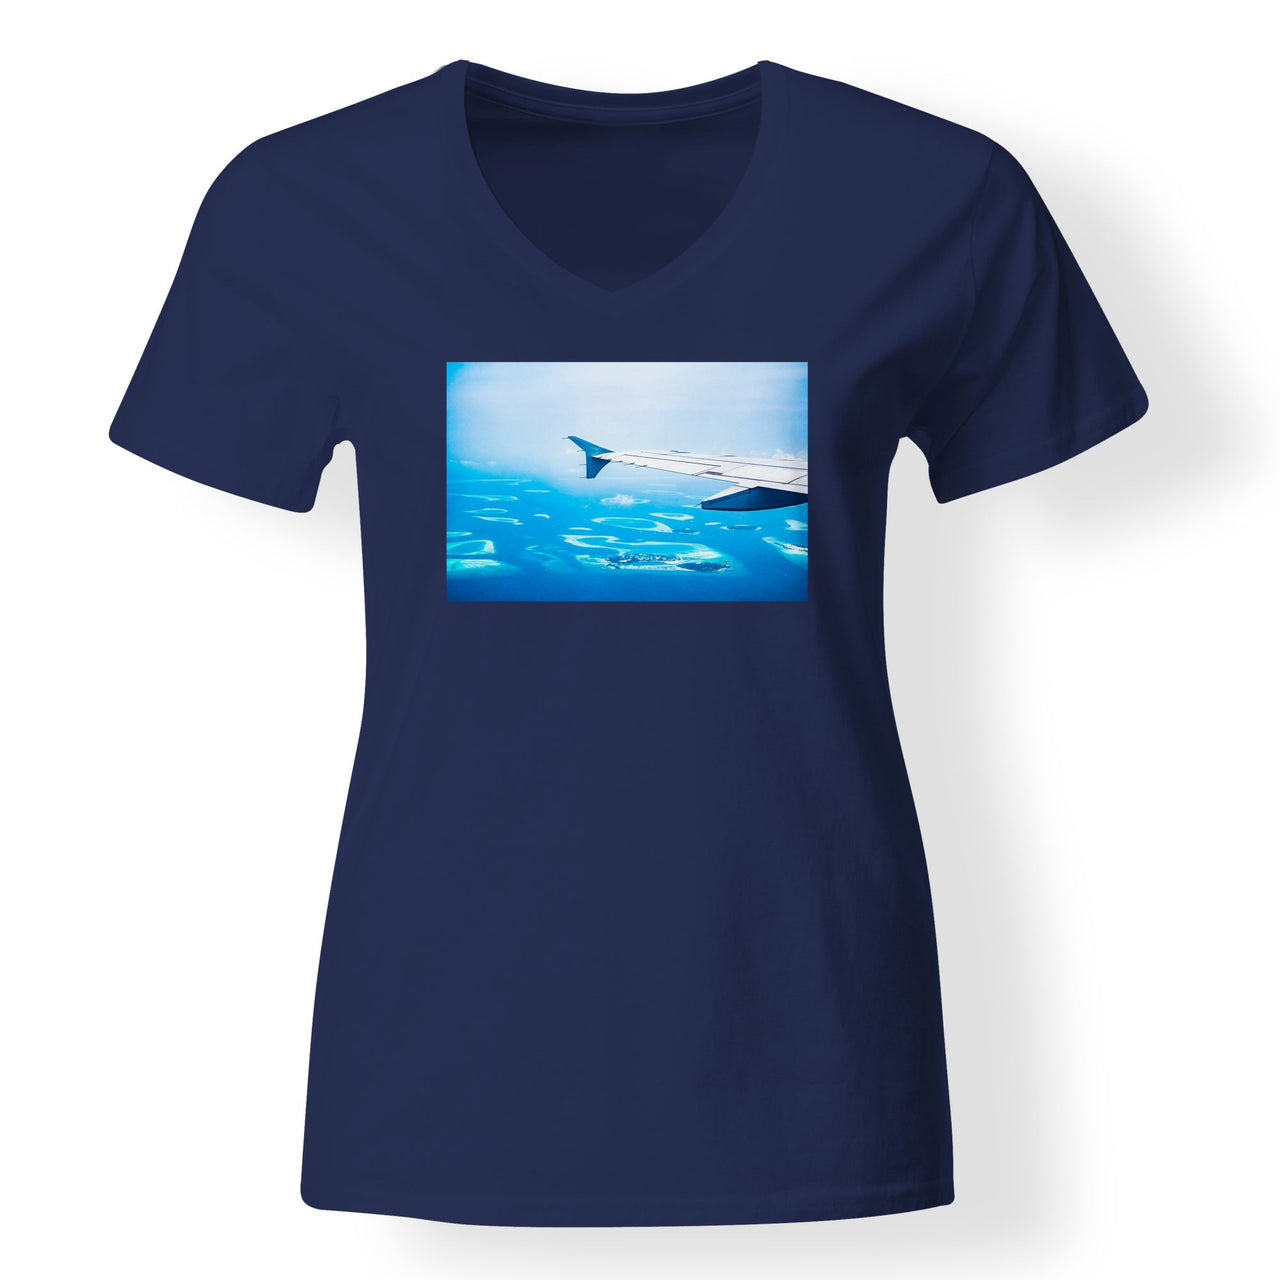 Outstanding View Through Airplane Wing Designed V-Neck T-Shirts